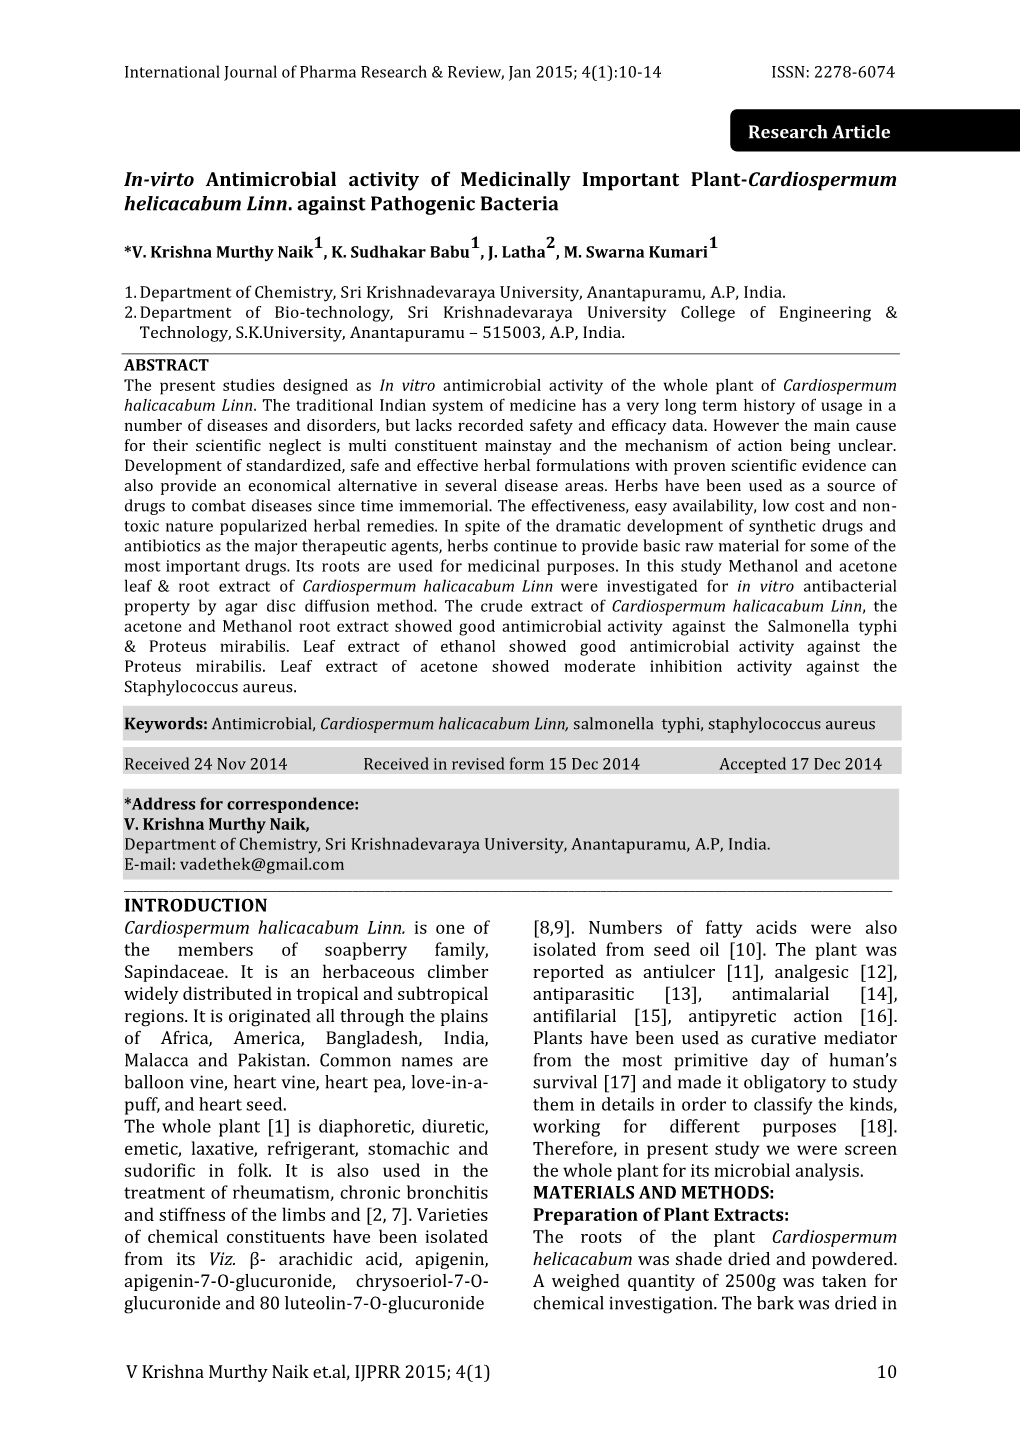 In-Virto Antimicrobial Activity of Medicinally Important Plant-Cardiospermum Helicacabum Linn